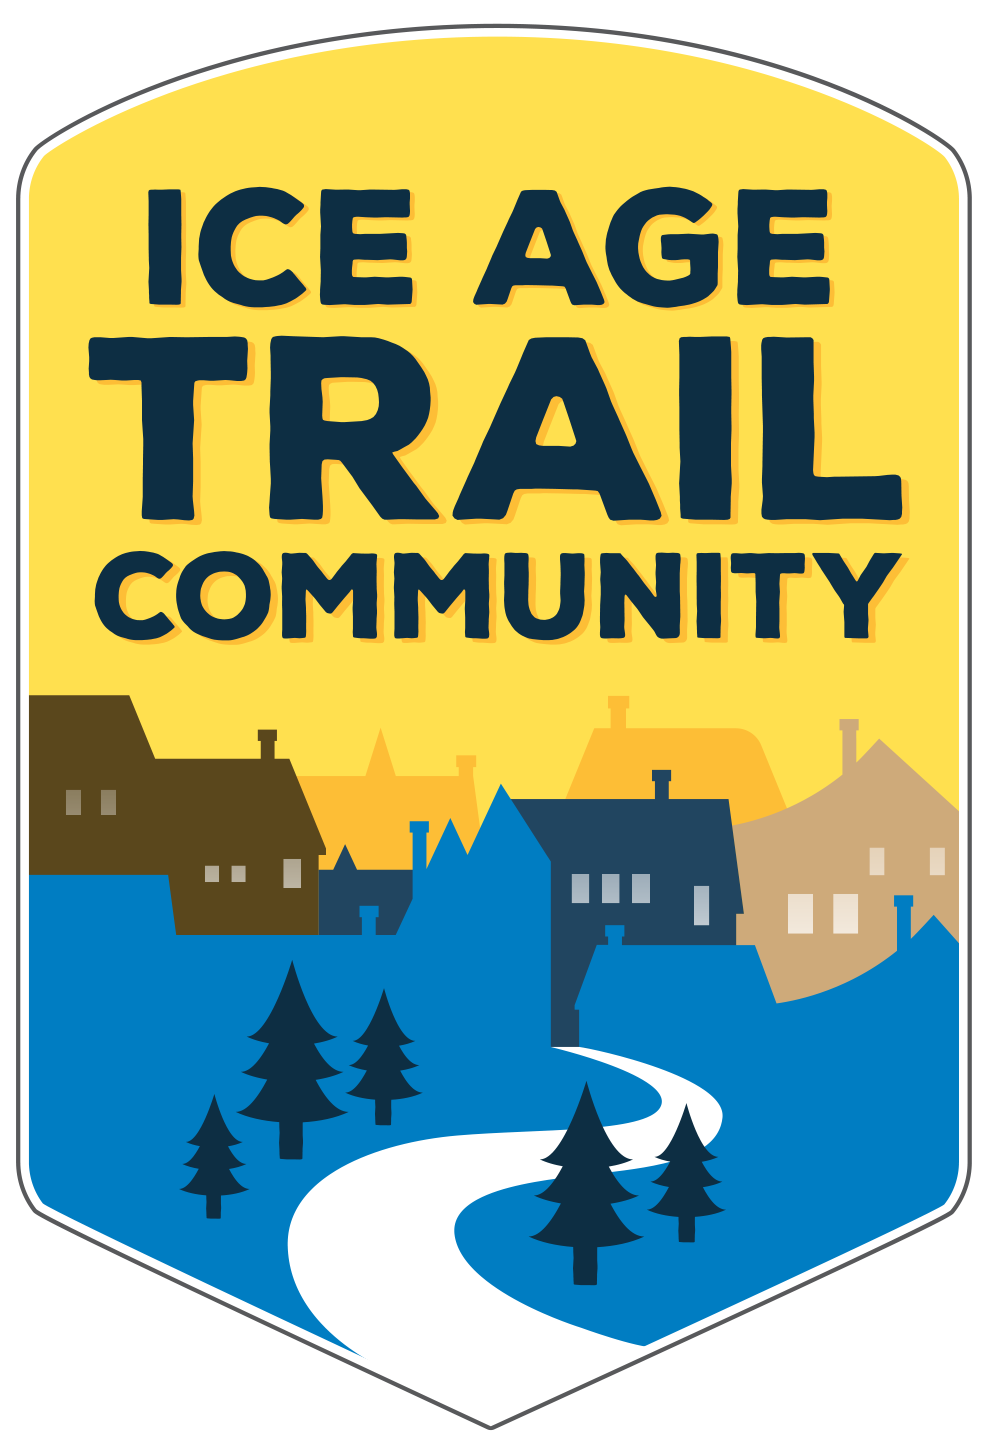 Baraboo Area Becomes An Ice Age Trail Community